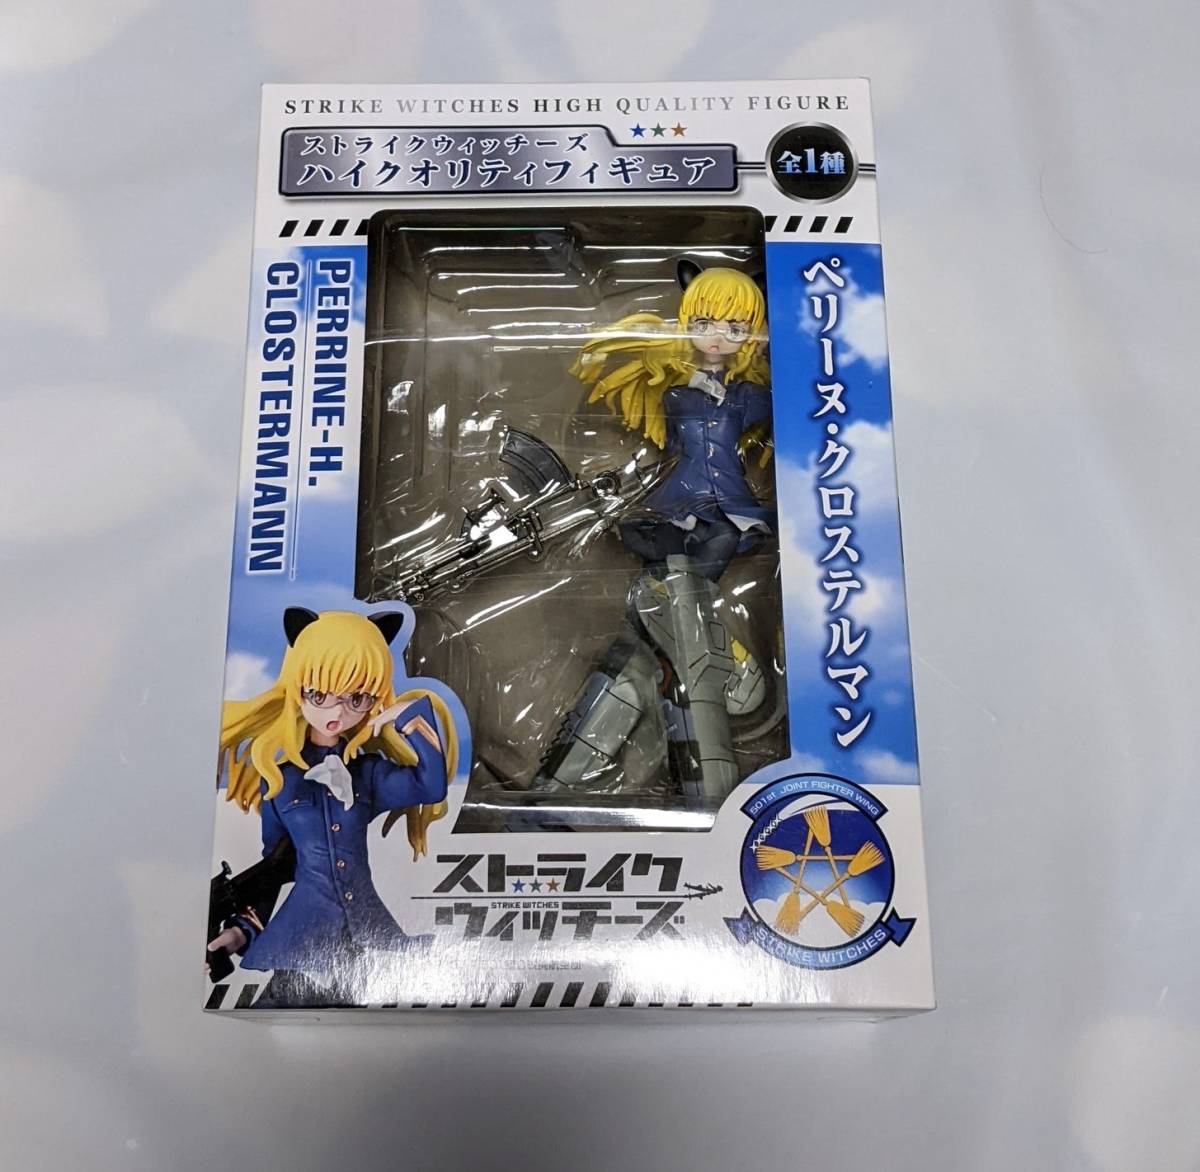 f dragon Strike Witches high quality figure Perry n Cross te Le Mans 